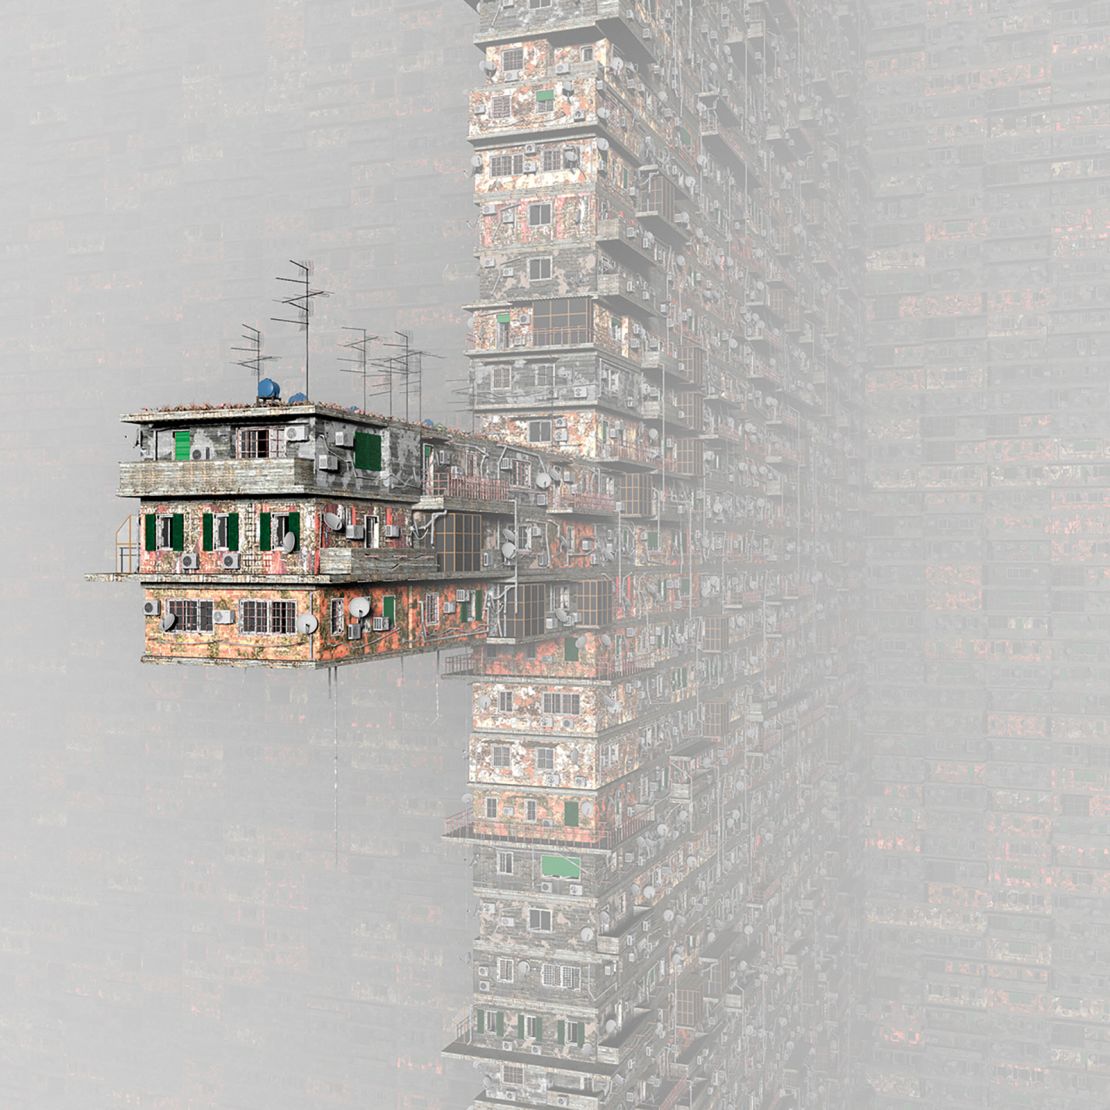 Costa's buildings emerge from the fog or submerge in water, showing the power of nature to reclaim the world.